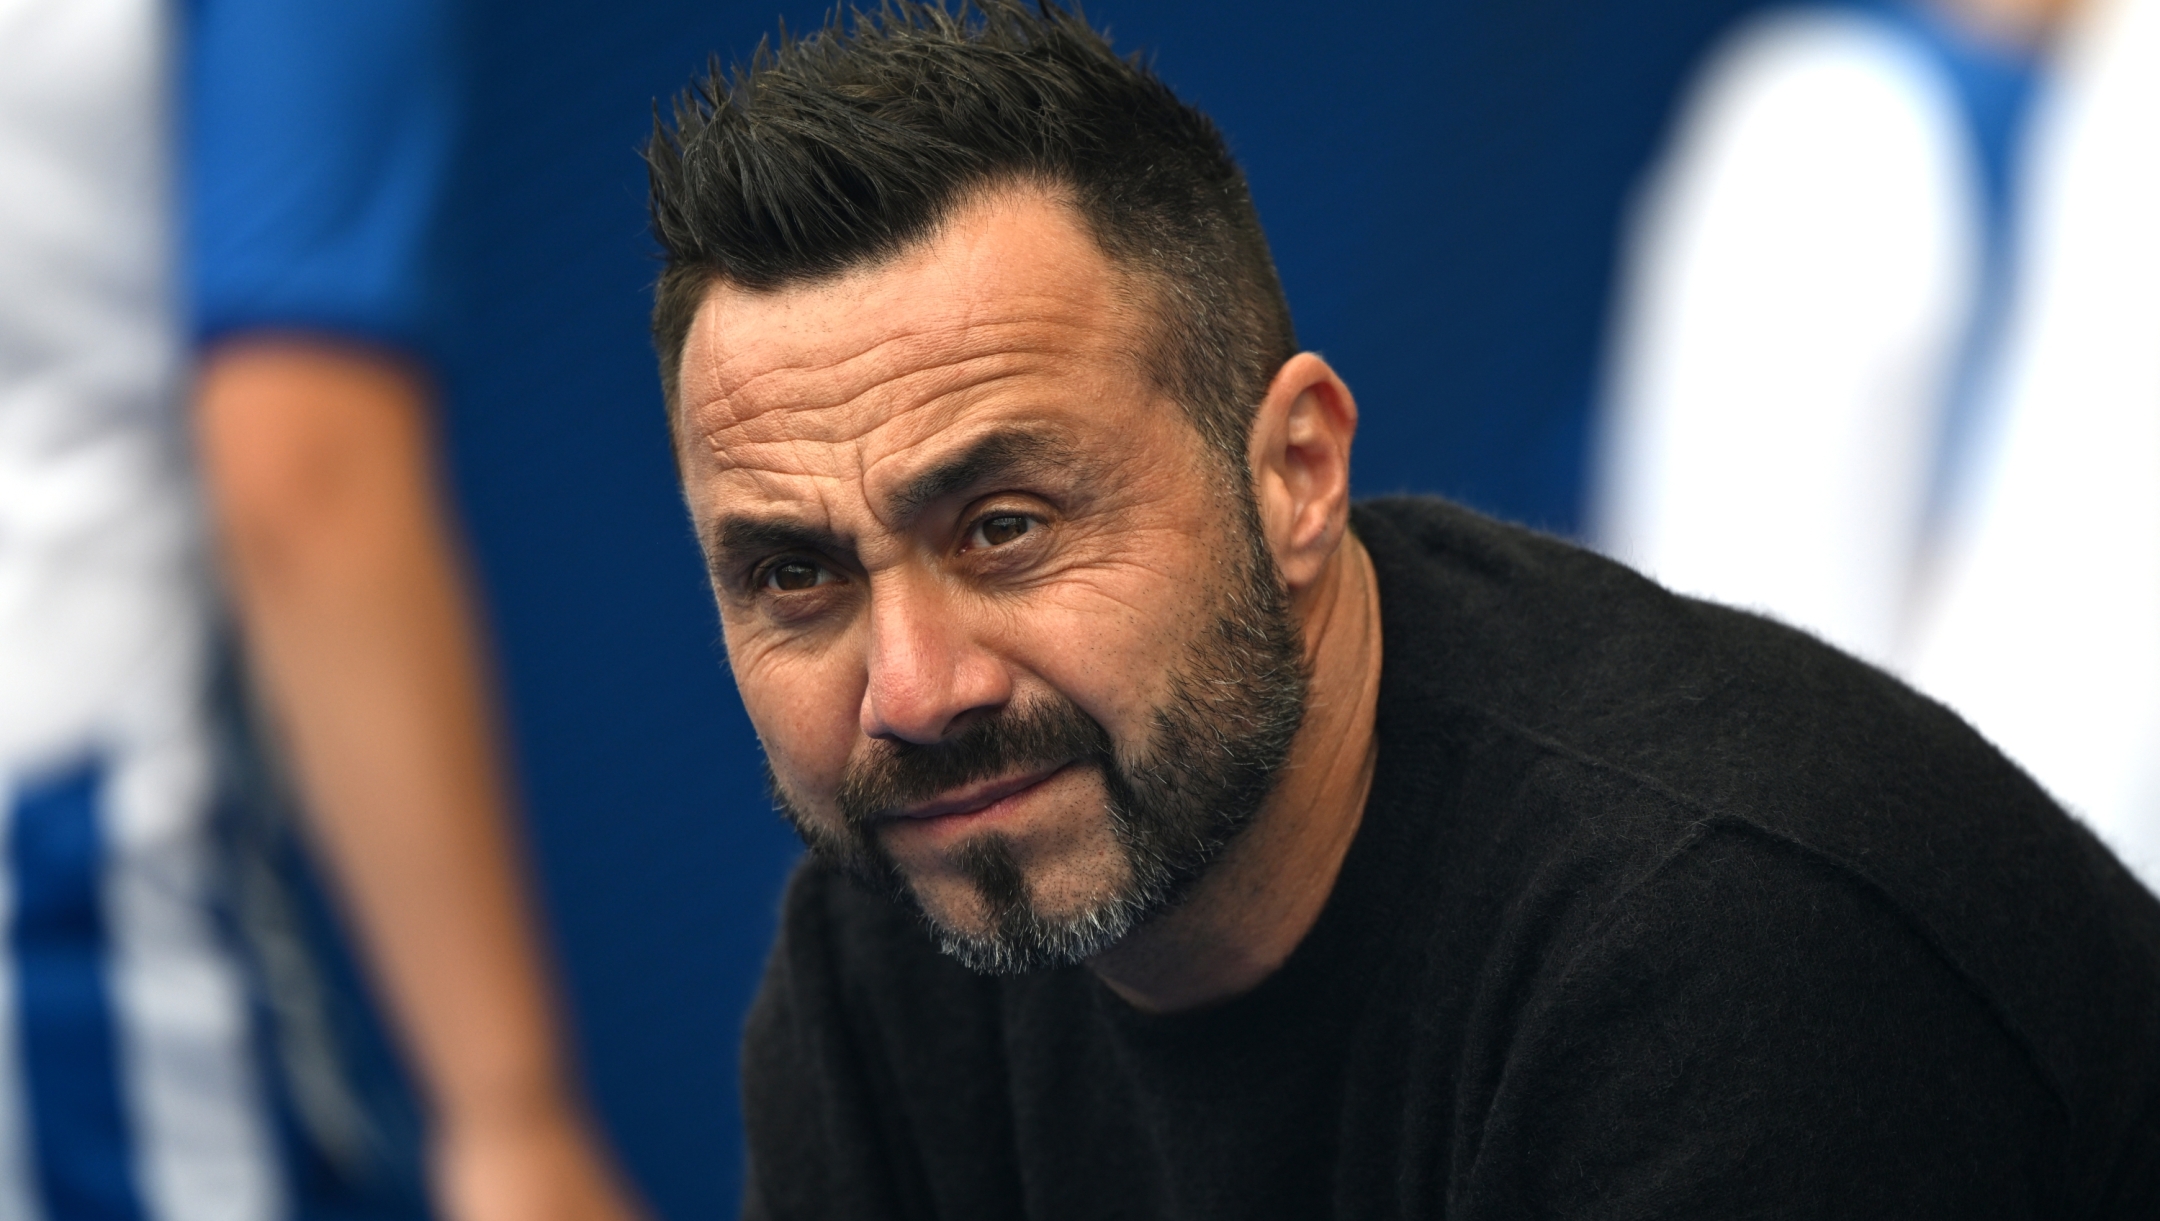 BRIGHTON, ENGLAND - AUGUST 12: Roberto De Zerbi, Manager of Brighton & Hove Albion, looks on prior to the Premier League match between Brighton & Hove Albion and Luton Town at American Express Community Stadium on August 12, 2023 in Brighton, England. (Photo by Mike Hewitt/Getty Images)